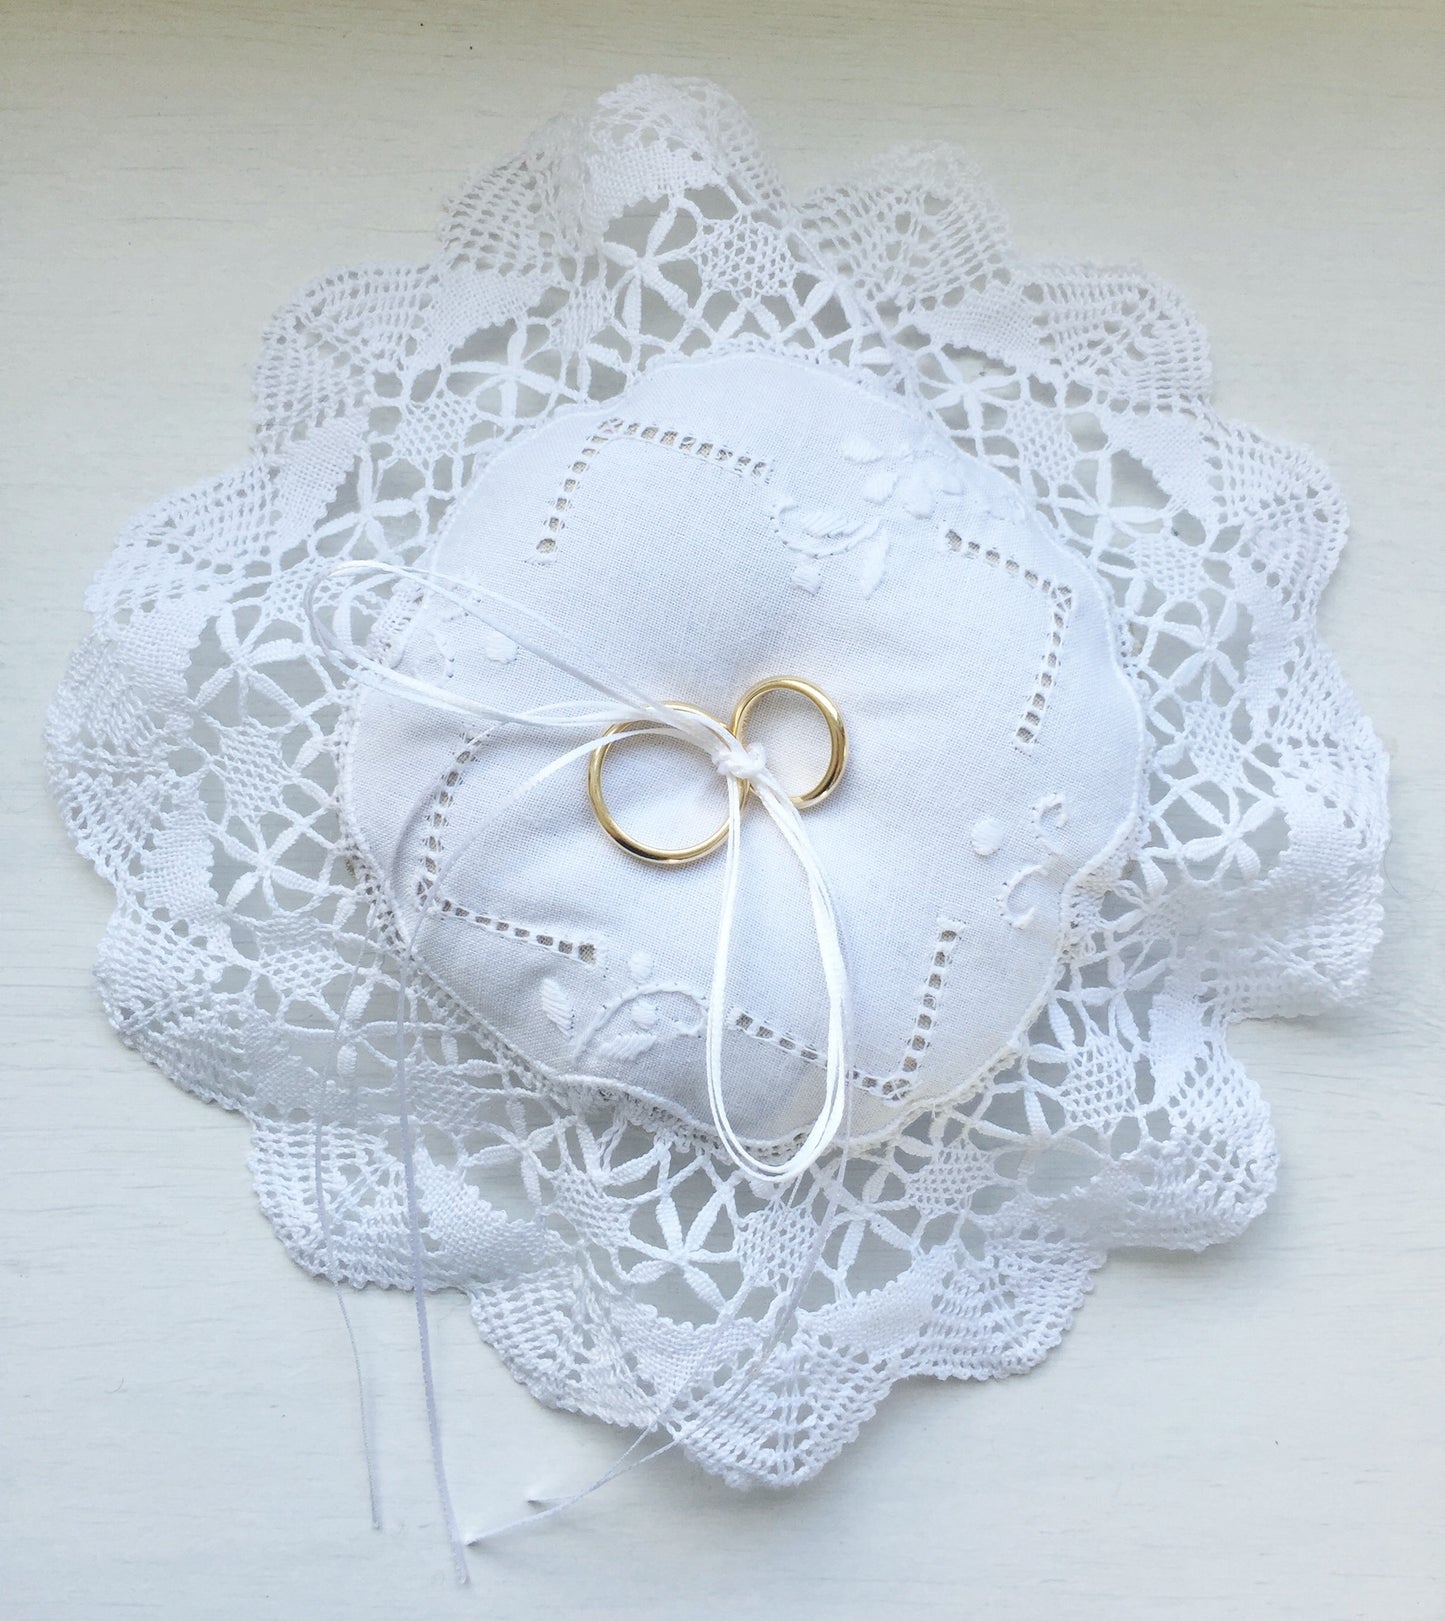 Bruges Whitework Lace Ring Pillow with Dried Lavender Filling